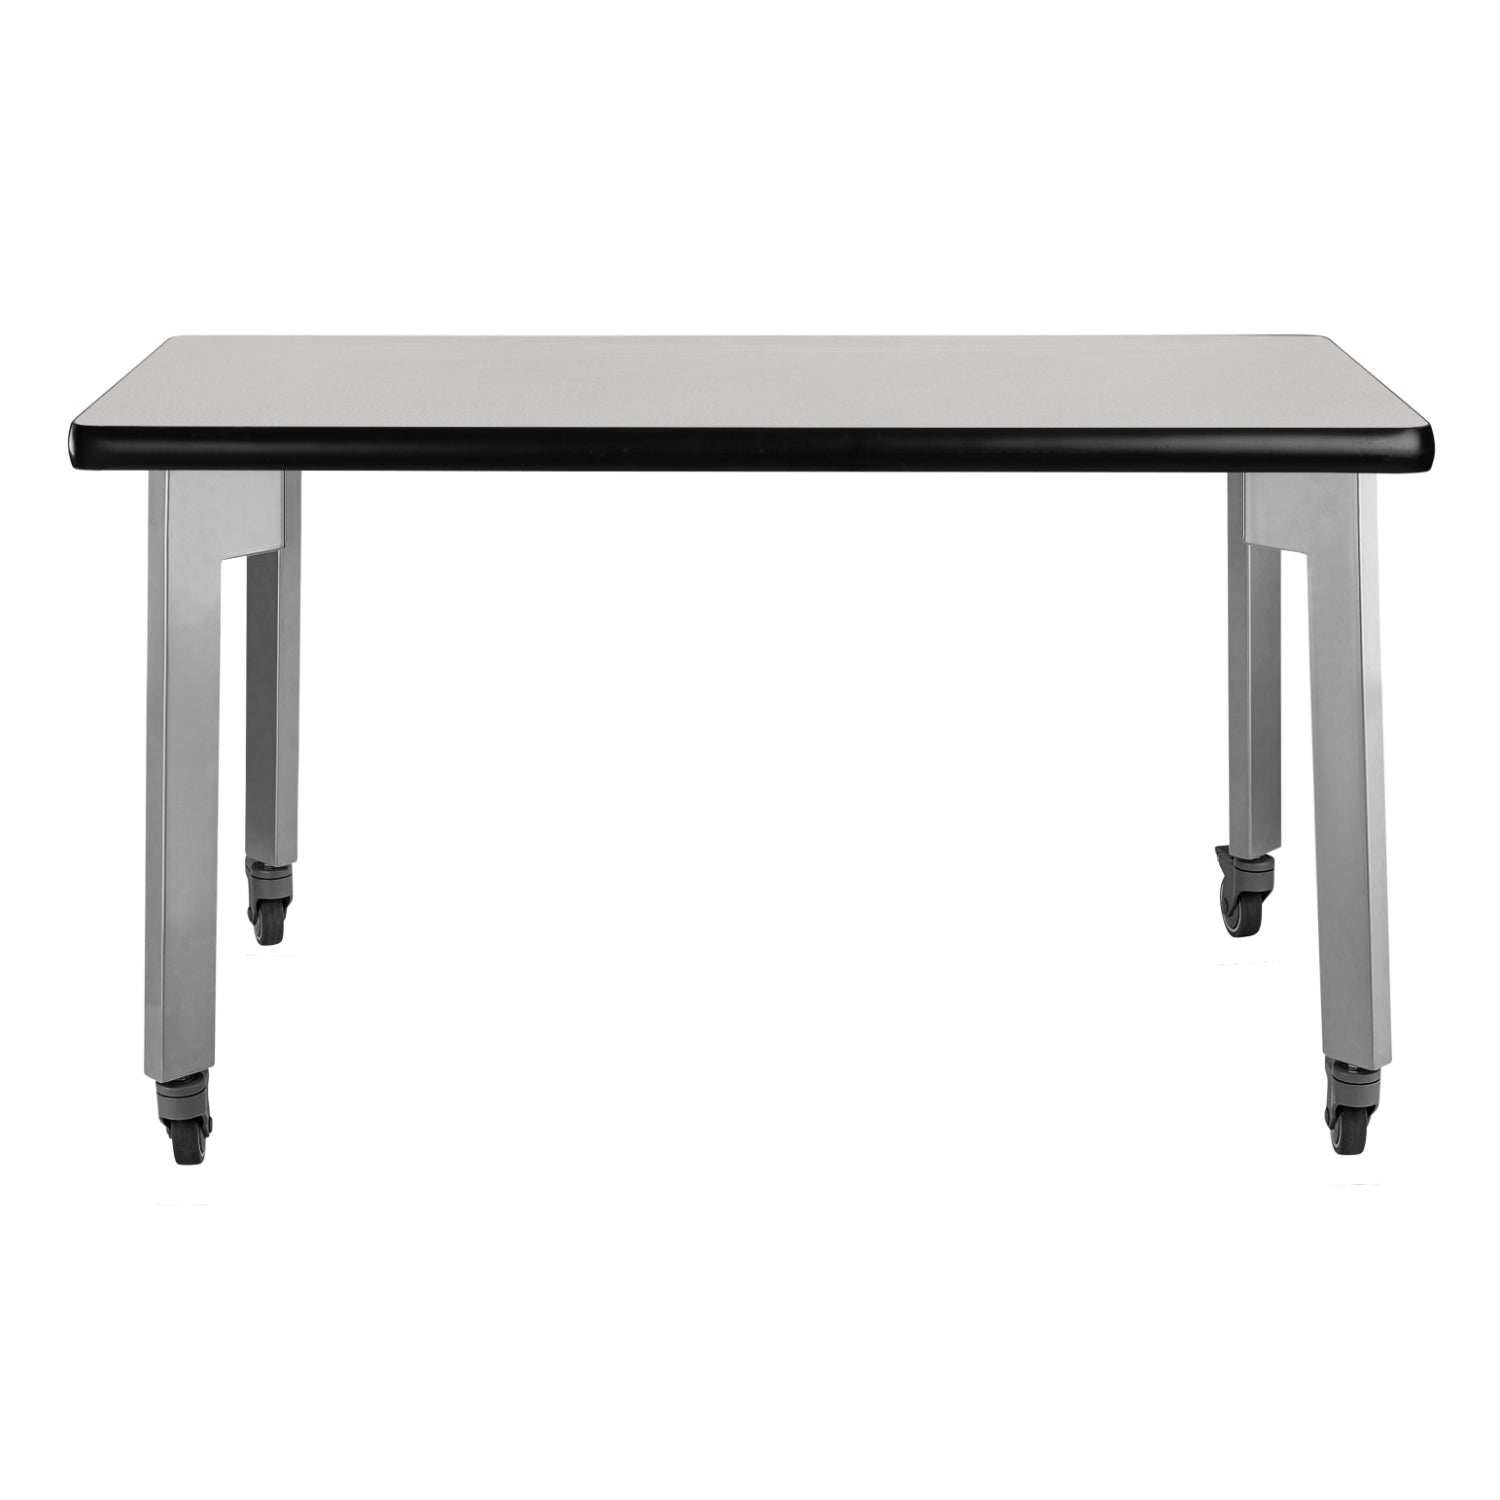 Titan Mobile Table, 30" x 36", Standard High Pressure Laminate Top with Particleboard Core and T-Mold Edge